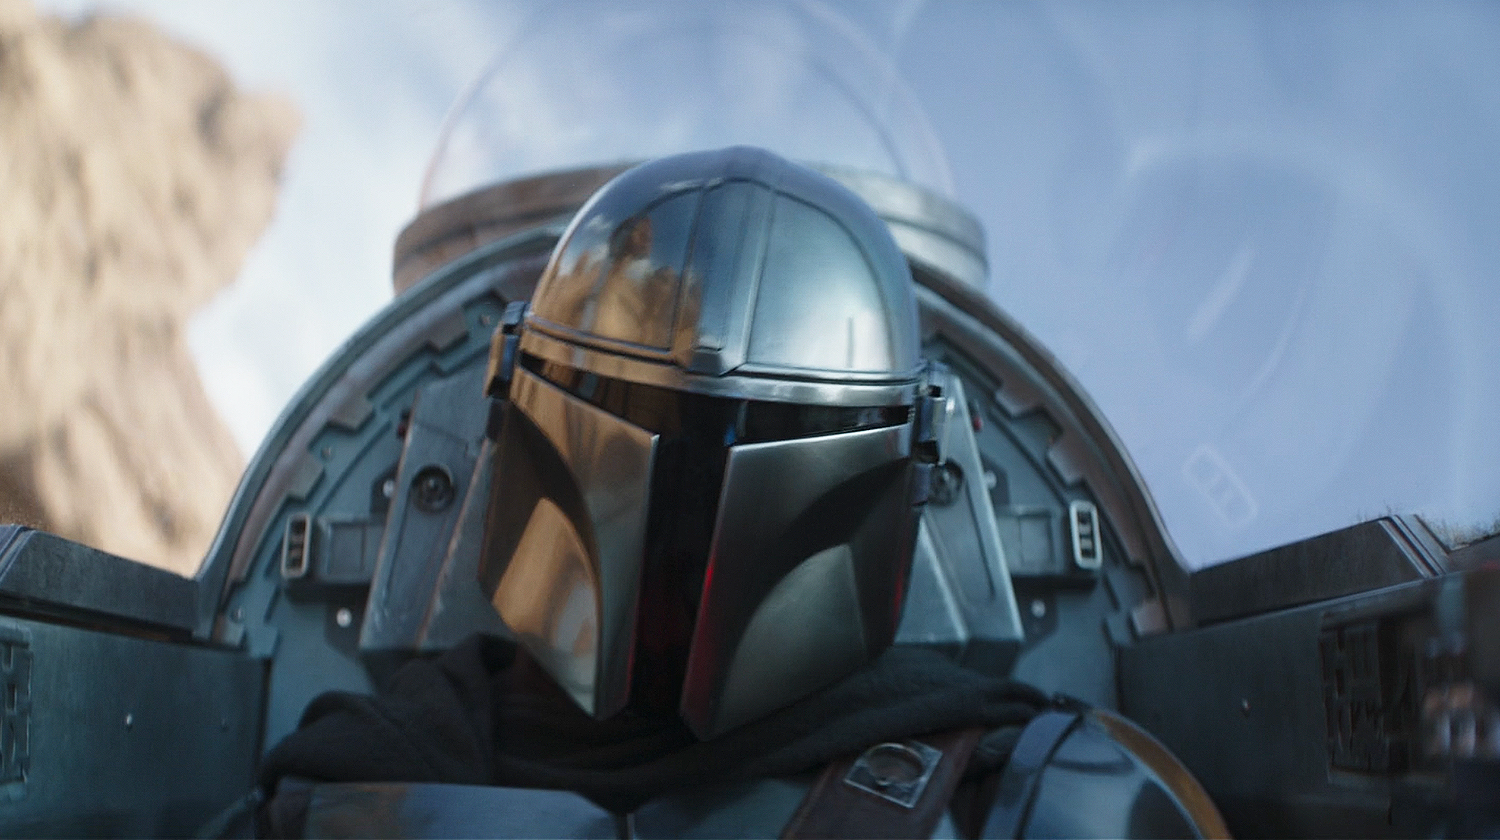 10 shows like The Mandalorian to watch now - The Manual